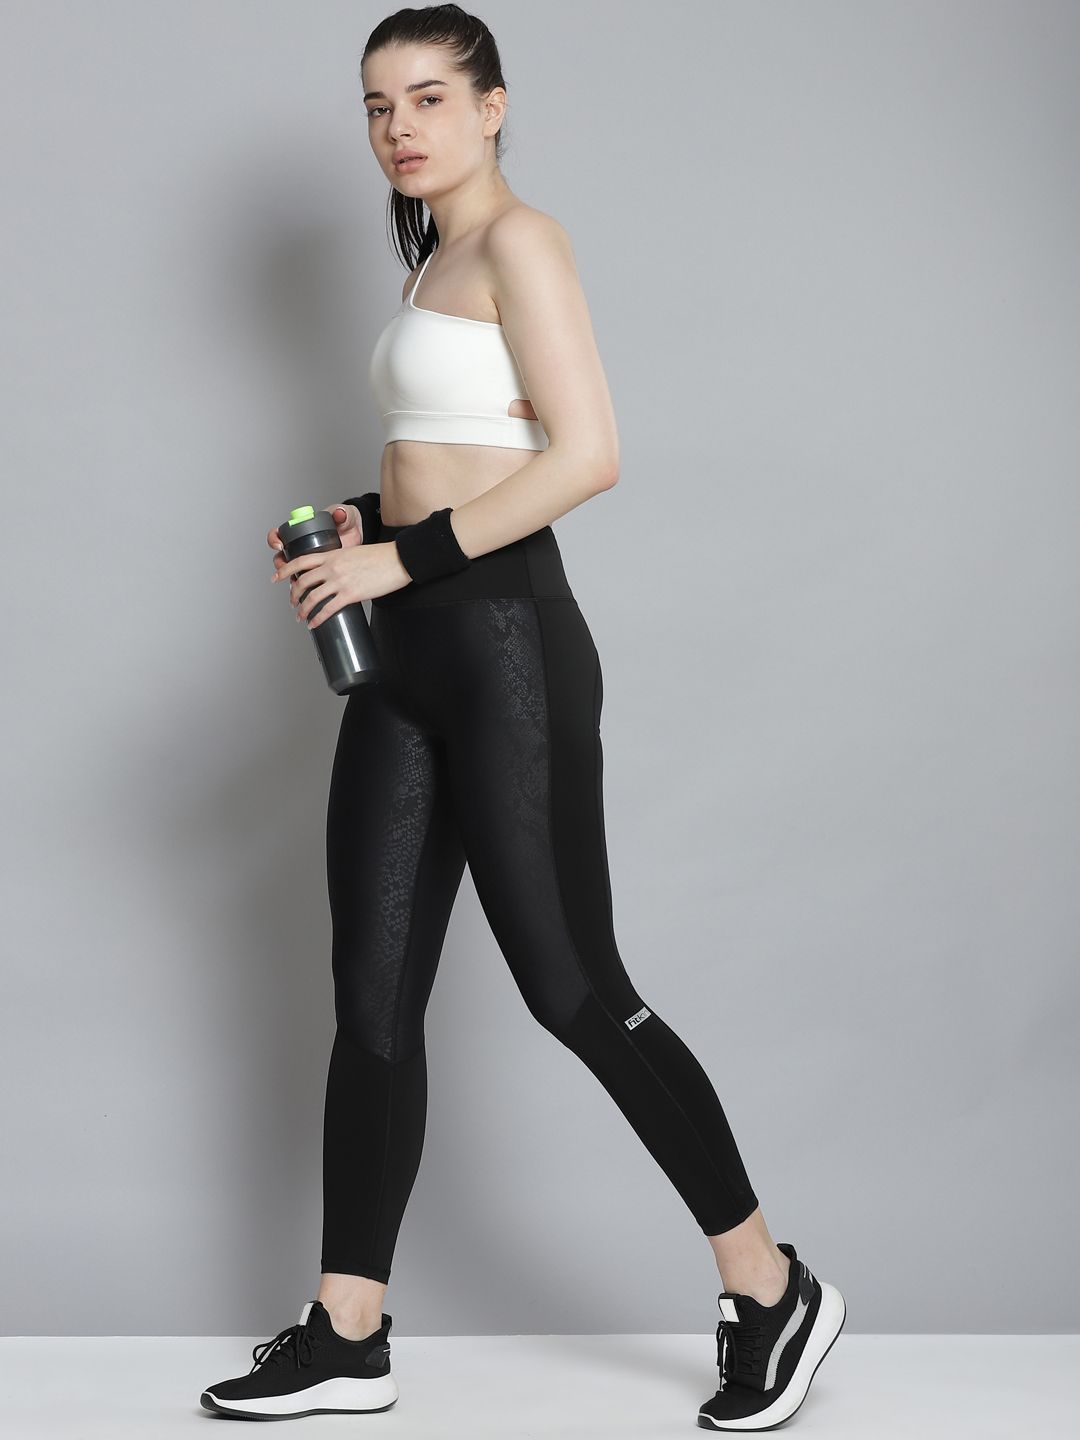 Fitkin Women Black Printed Active Quick Dry Tights Price in India